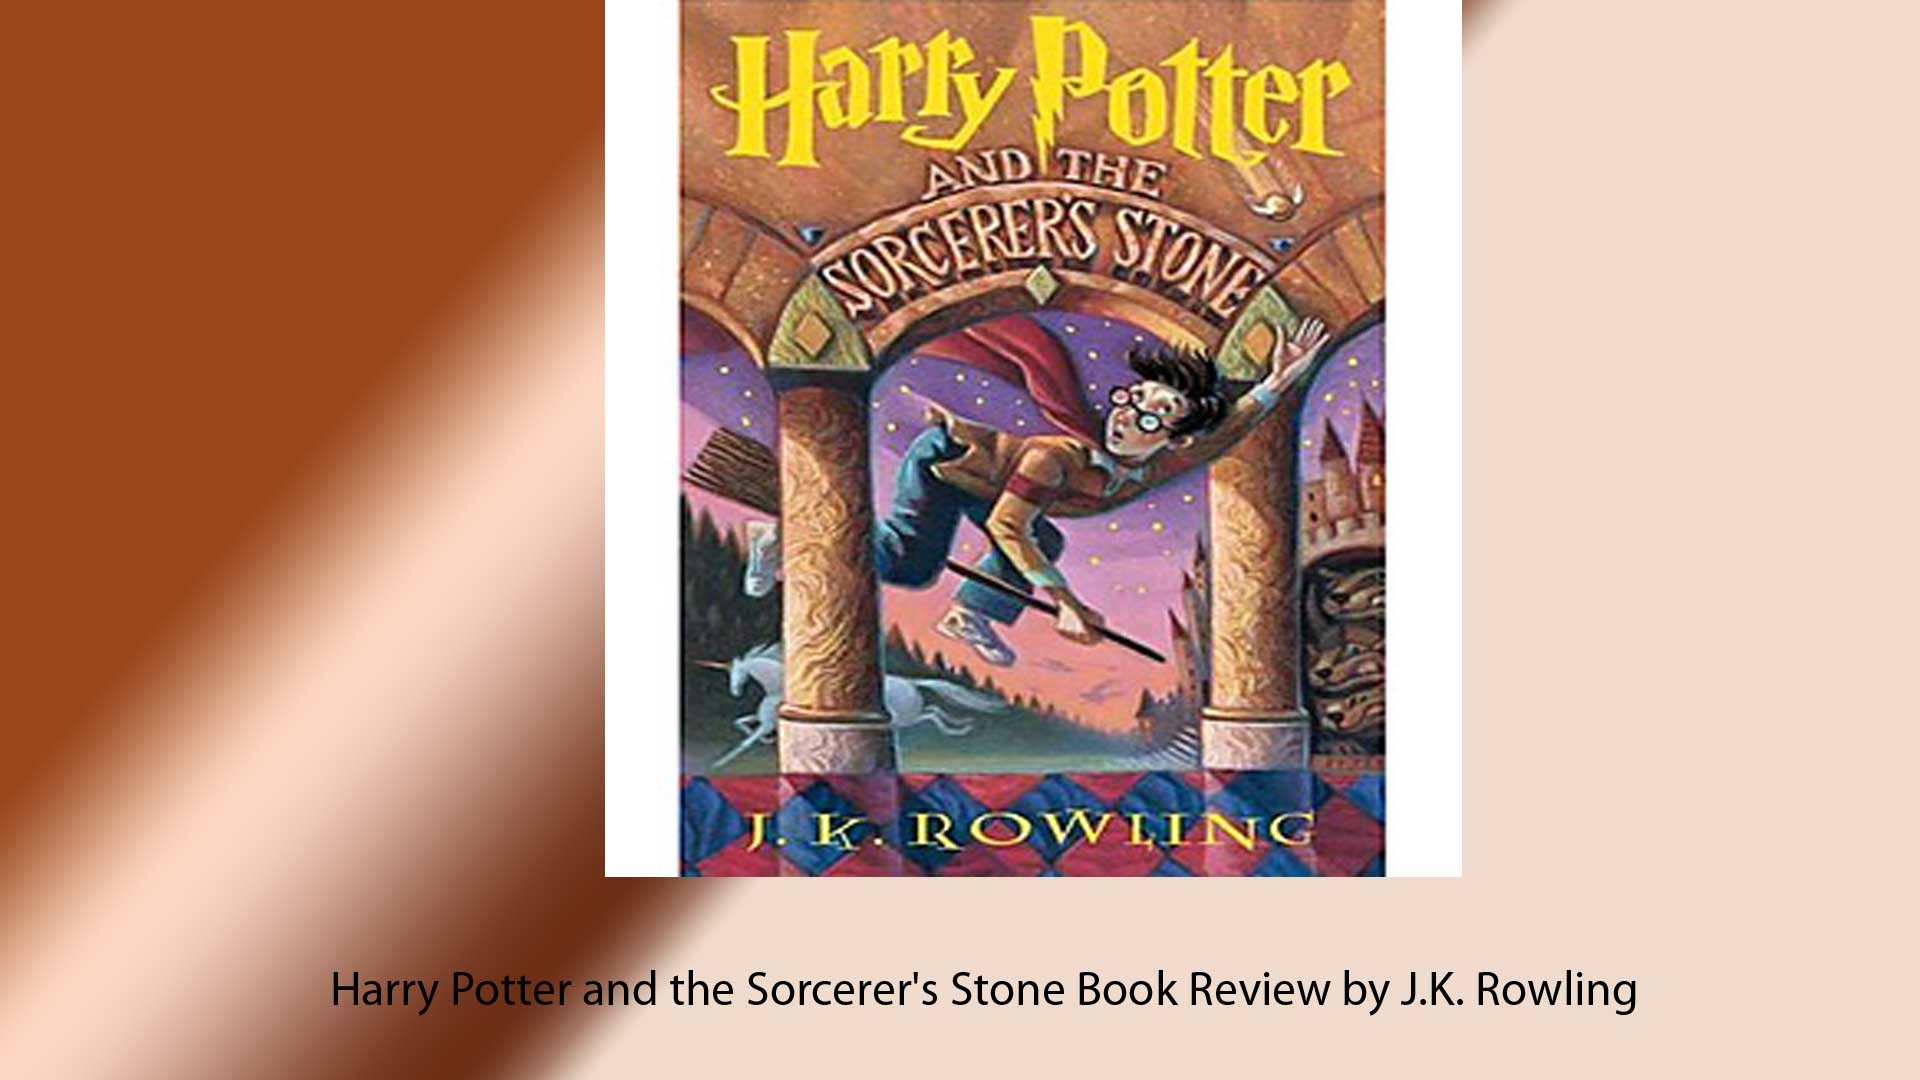 Harry Potter and the Sorcerer's Stone Book Review feature image